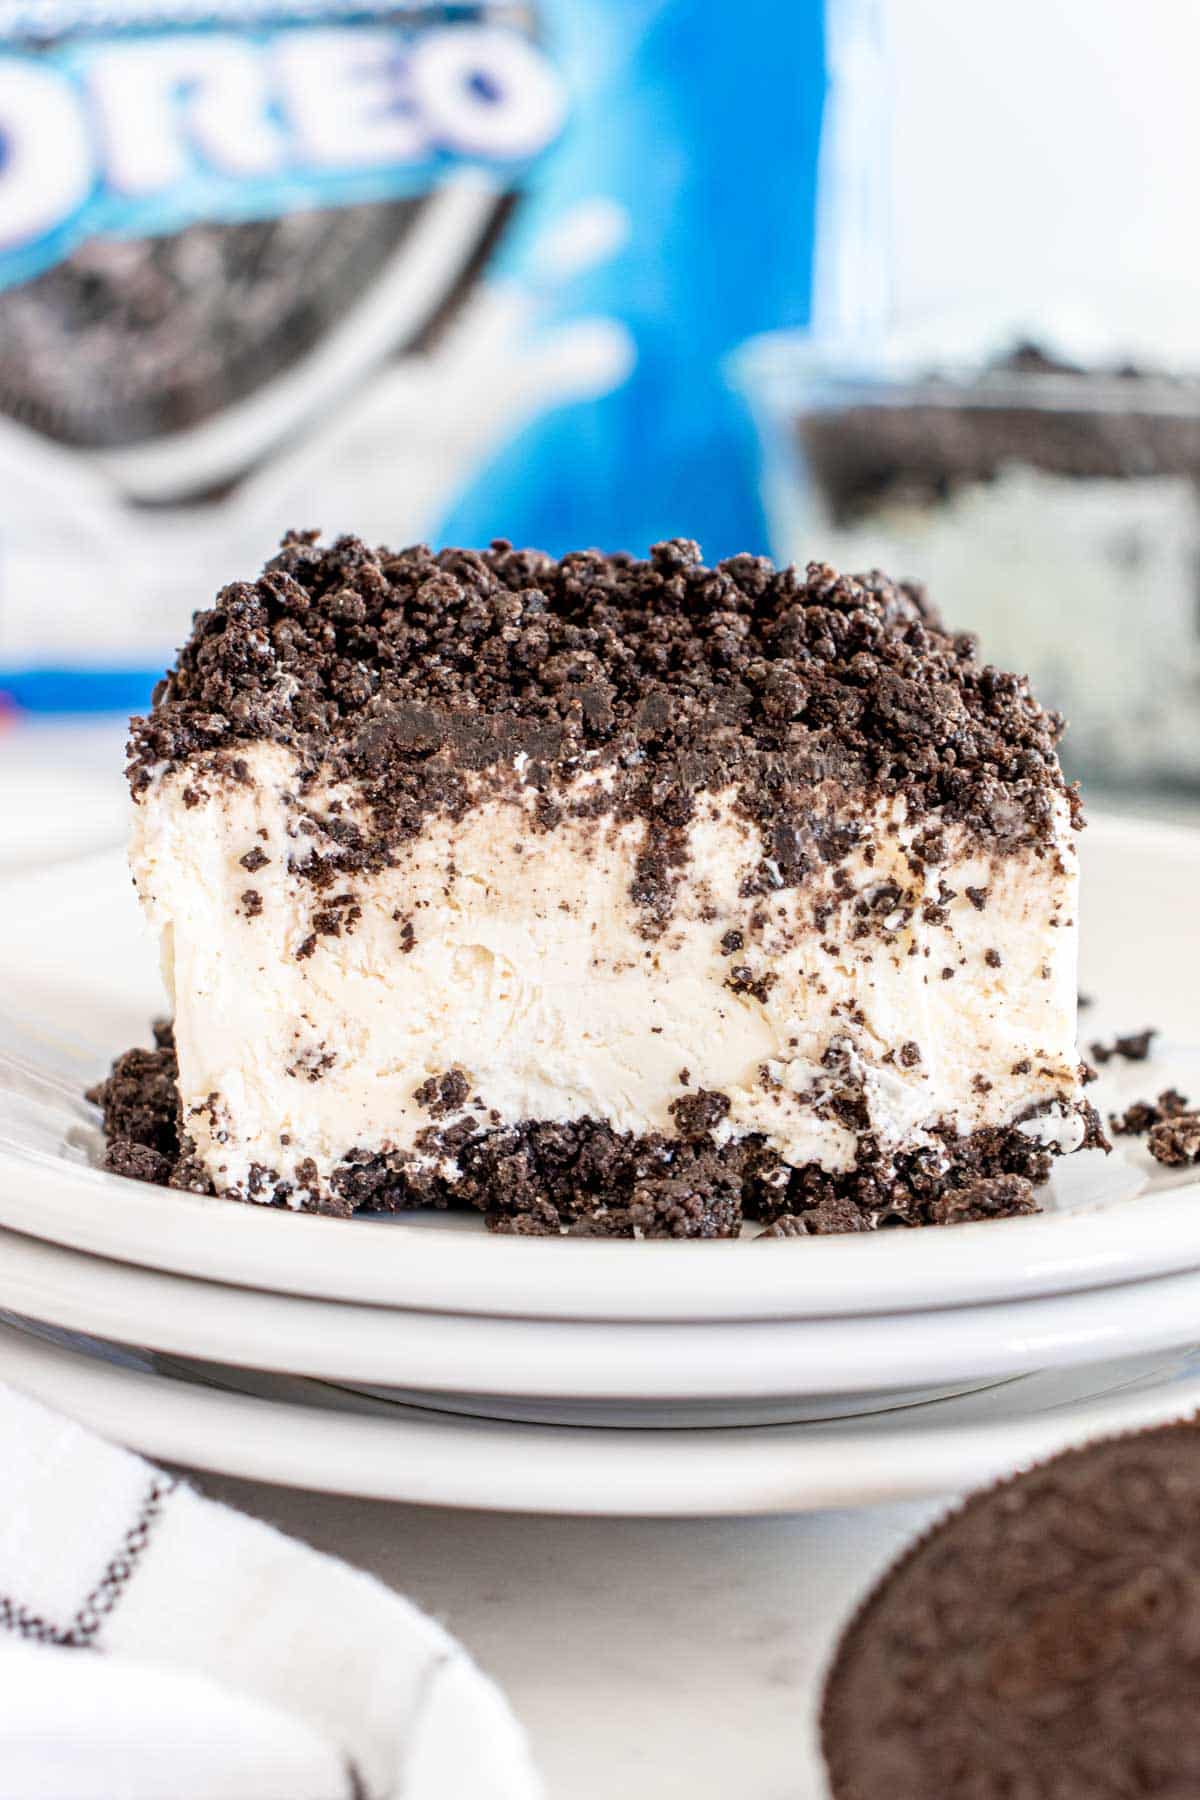 A slice of cookies and cream ice cream cake on a white plate, coated with crushed cookie crumbs, with a package of oreo cookies visible in the background.